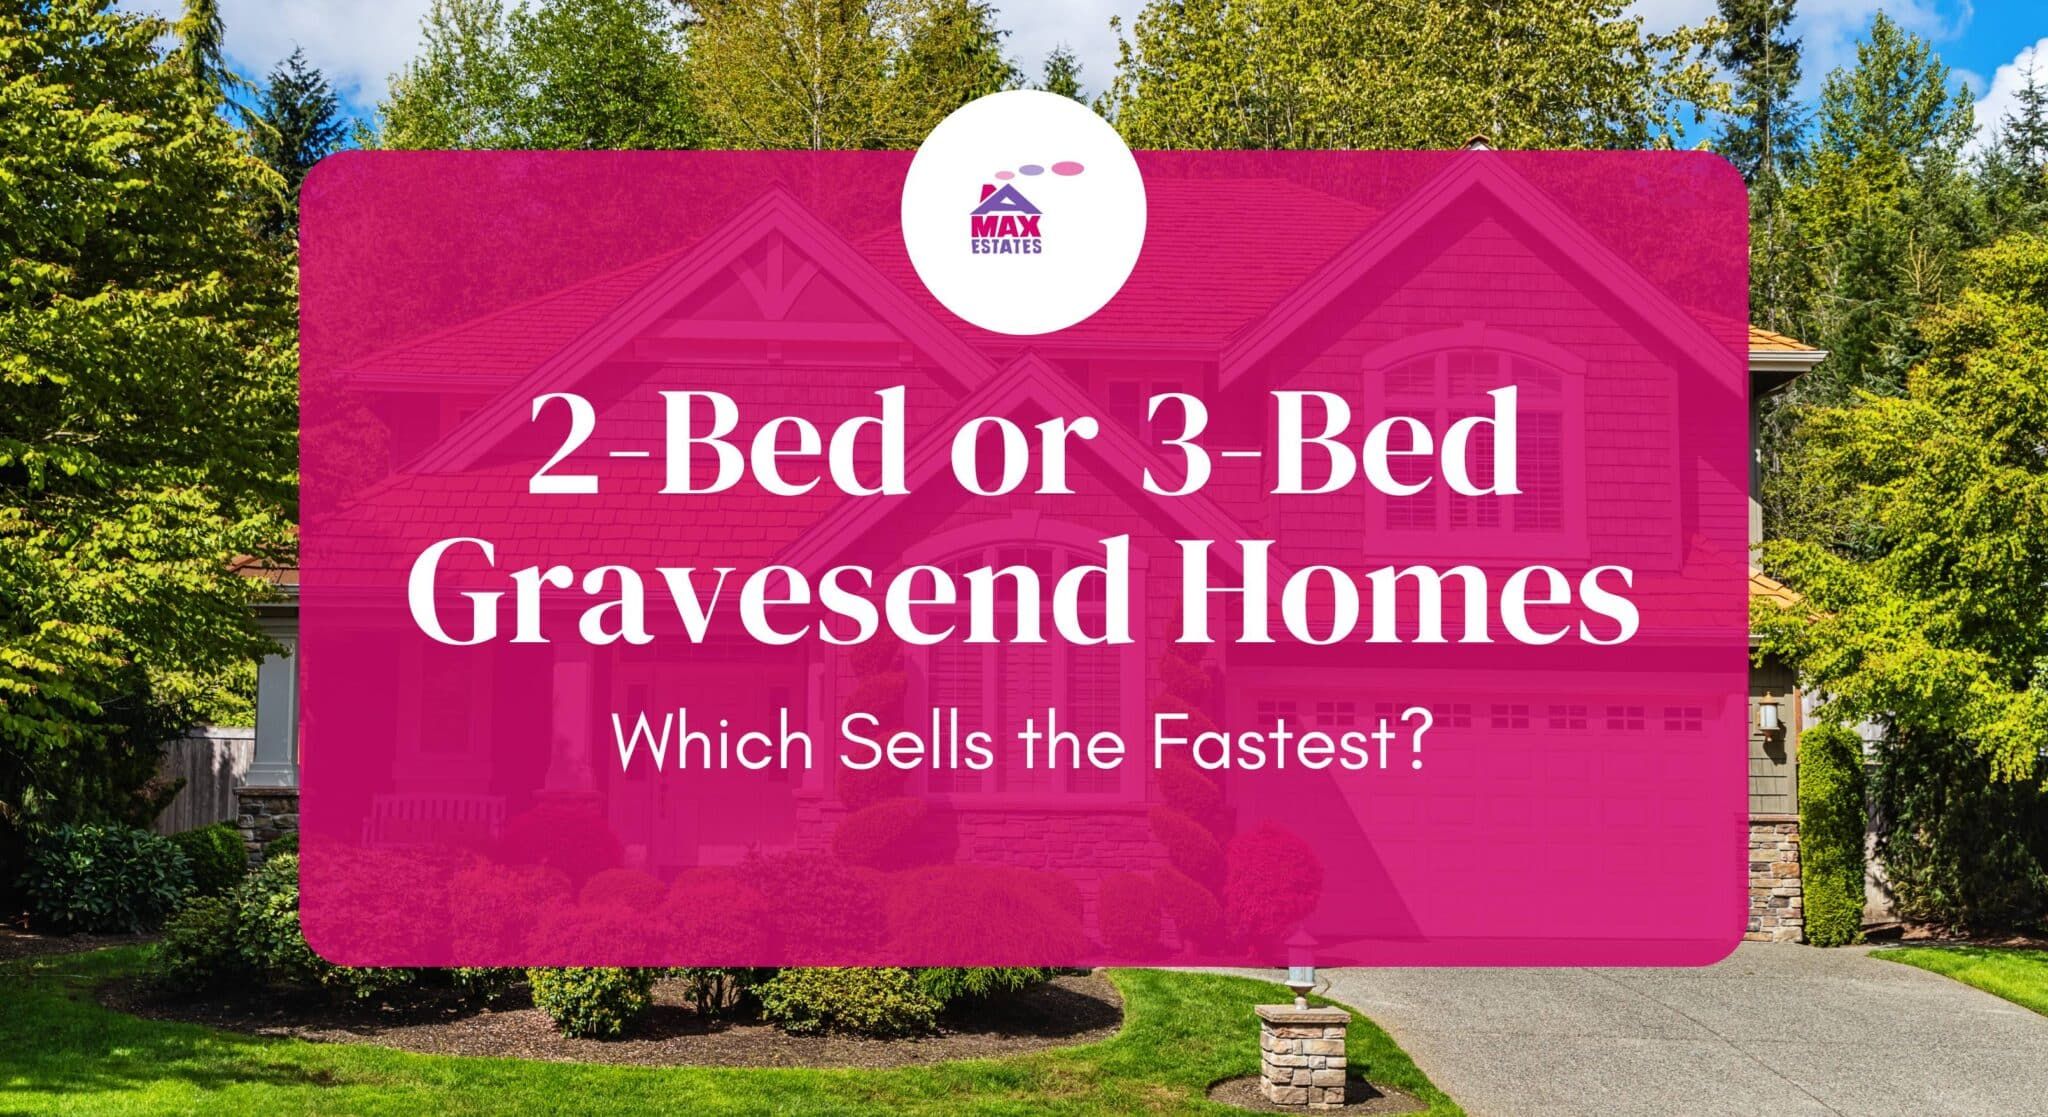 2-Bed or 3-Bed Gravesend Homes: Which Sells the Fastest?